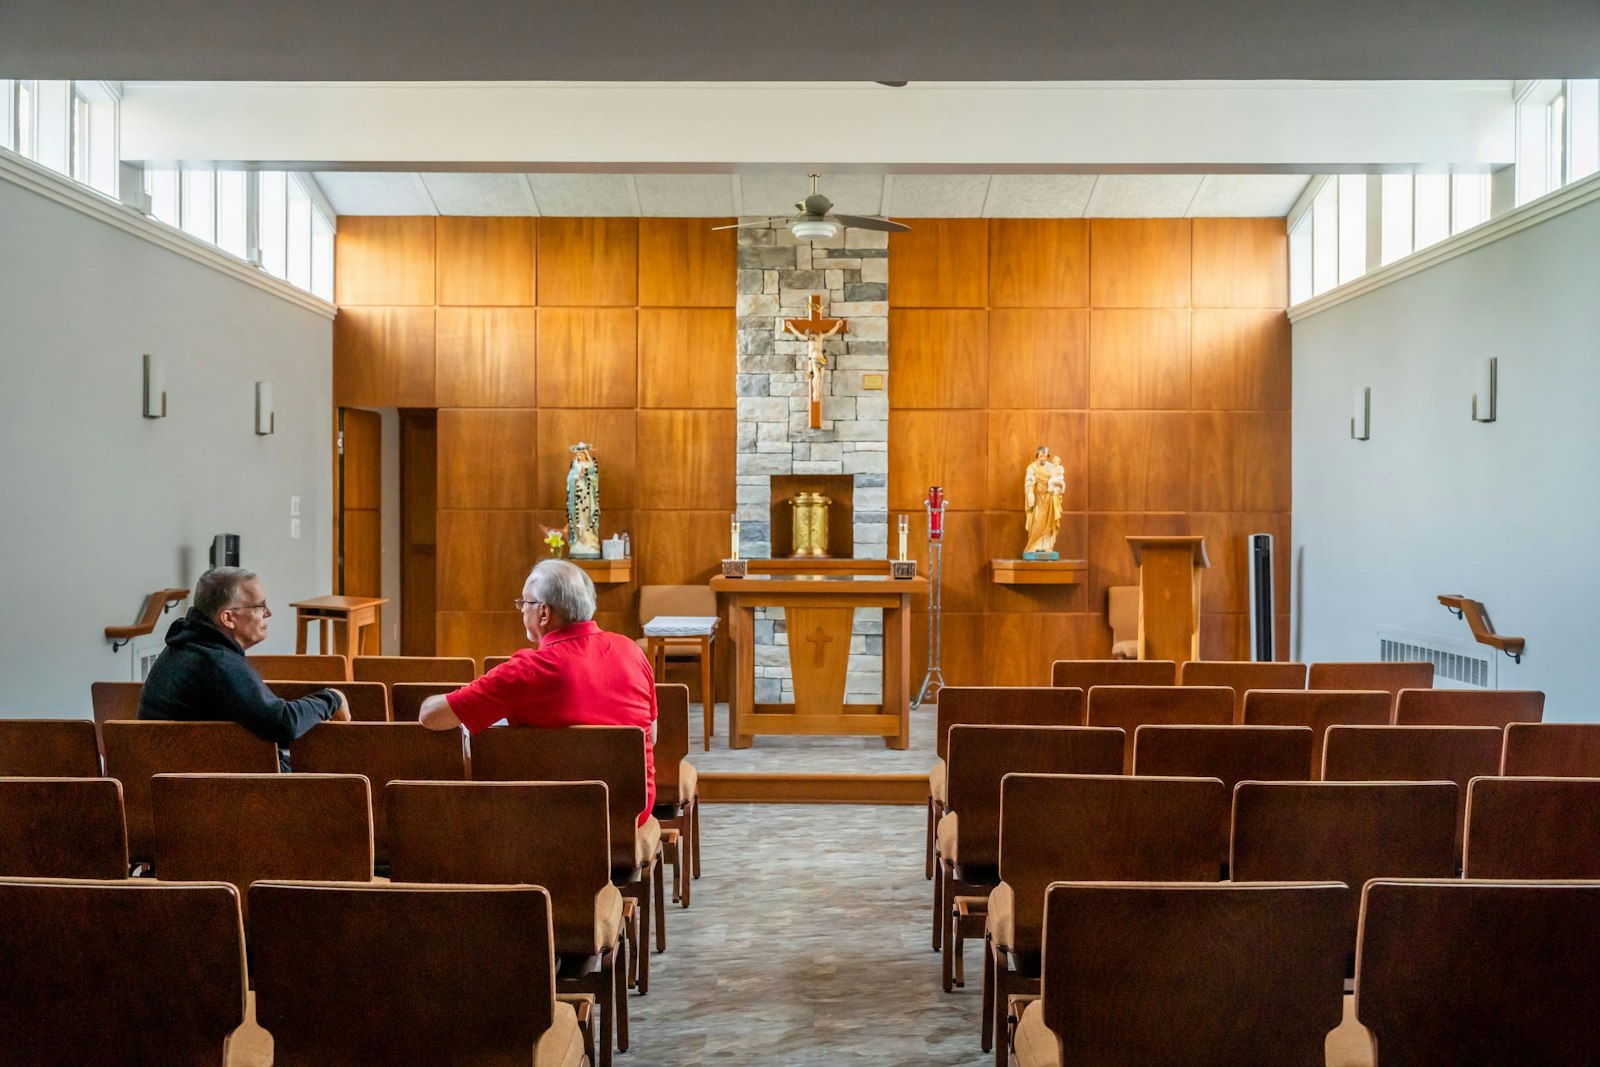 Cursillo participants pray and talk in the chapel at St. Benedict Parish in Waterford. The parish hosts one of four regular "ultreya" gatherings in the Archdiocese of Detroit. (Valaurian Waller | Detroit Catholic)